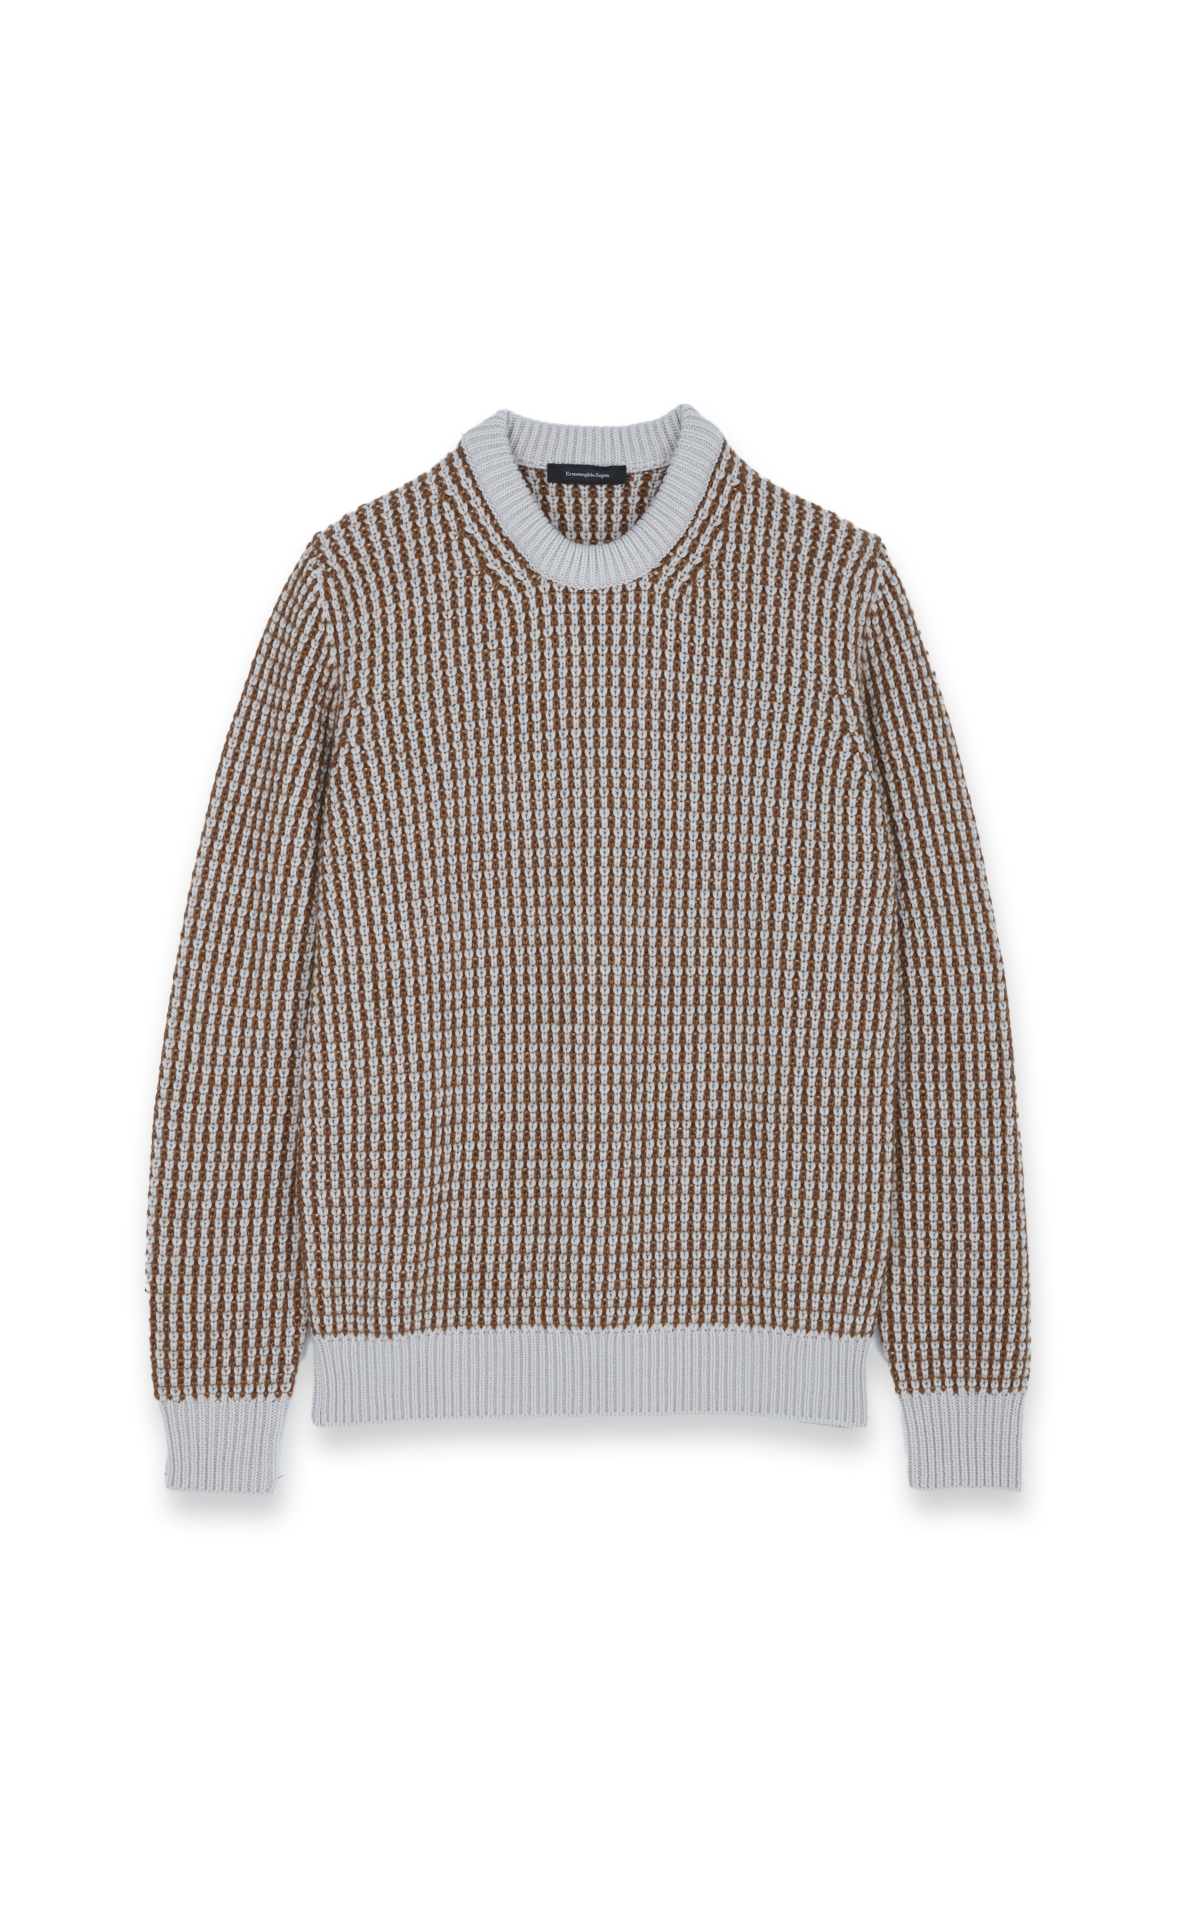 Two-tone cashmere knit jumper*